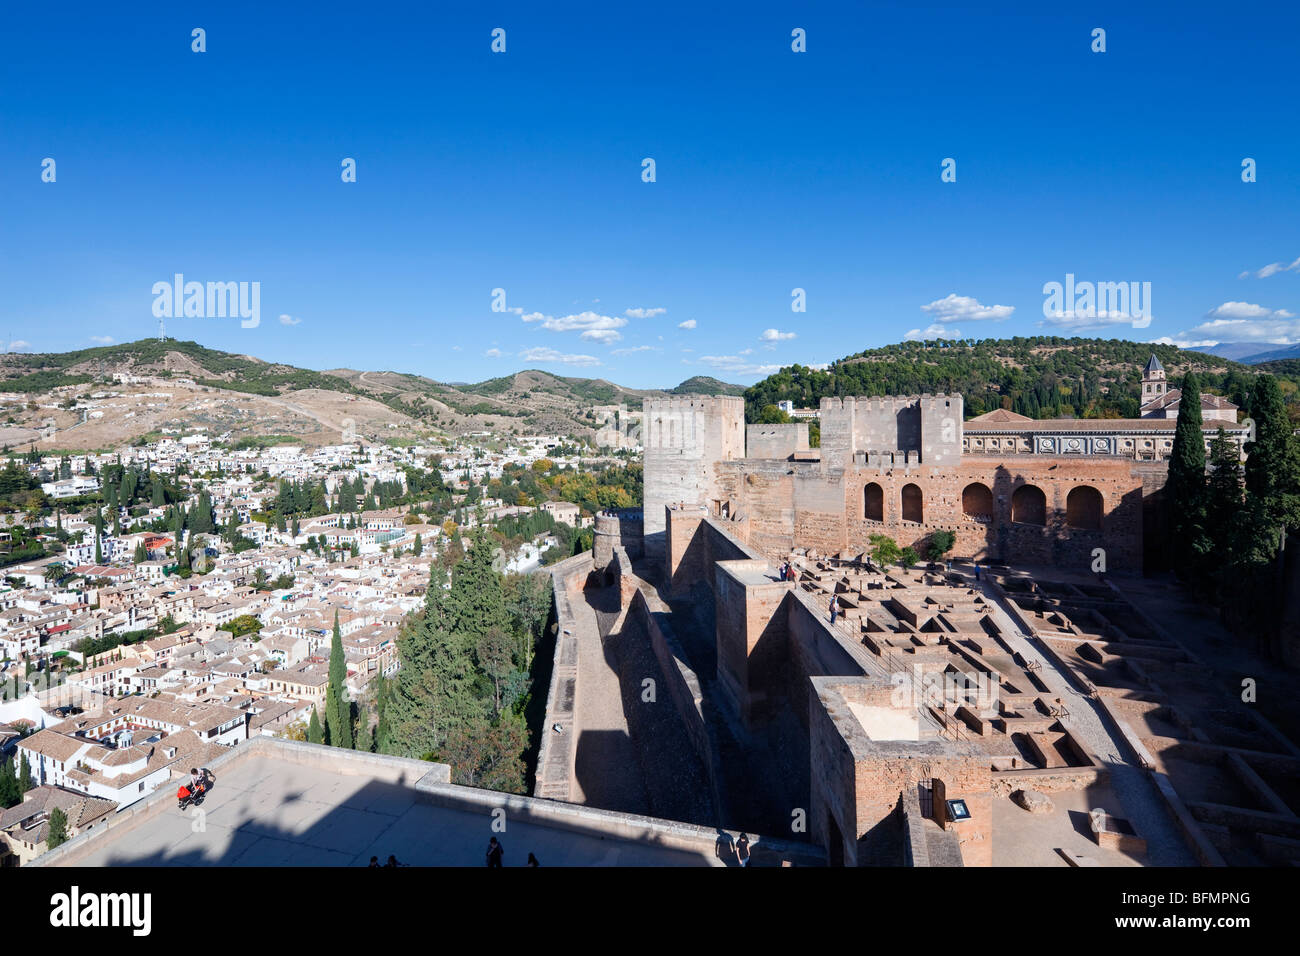 view of the Alhambra palace from the Alcazaba, Granada, Spain Stock Photo